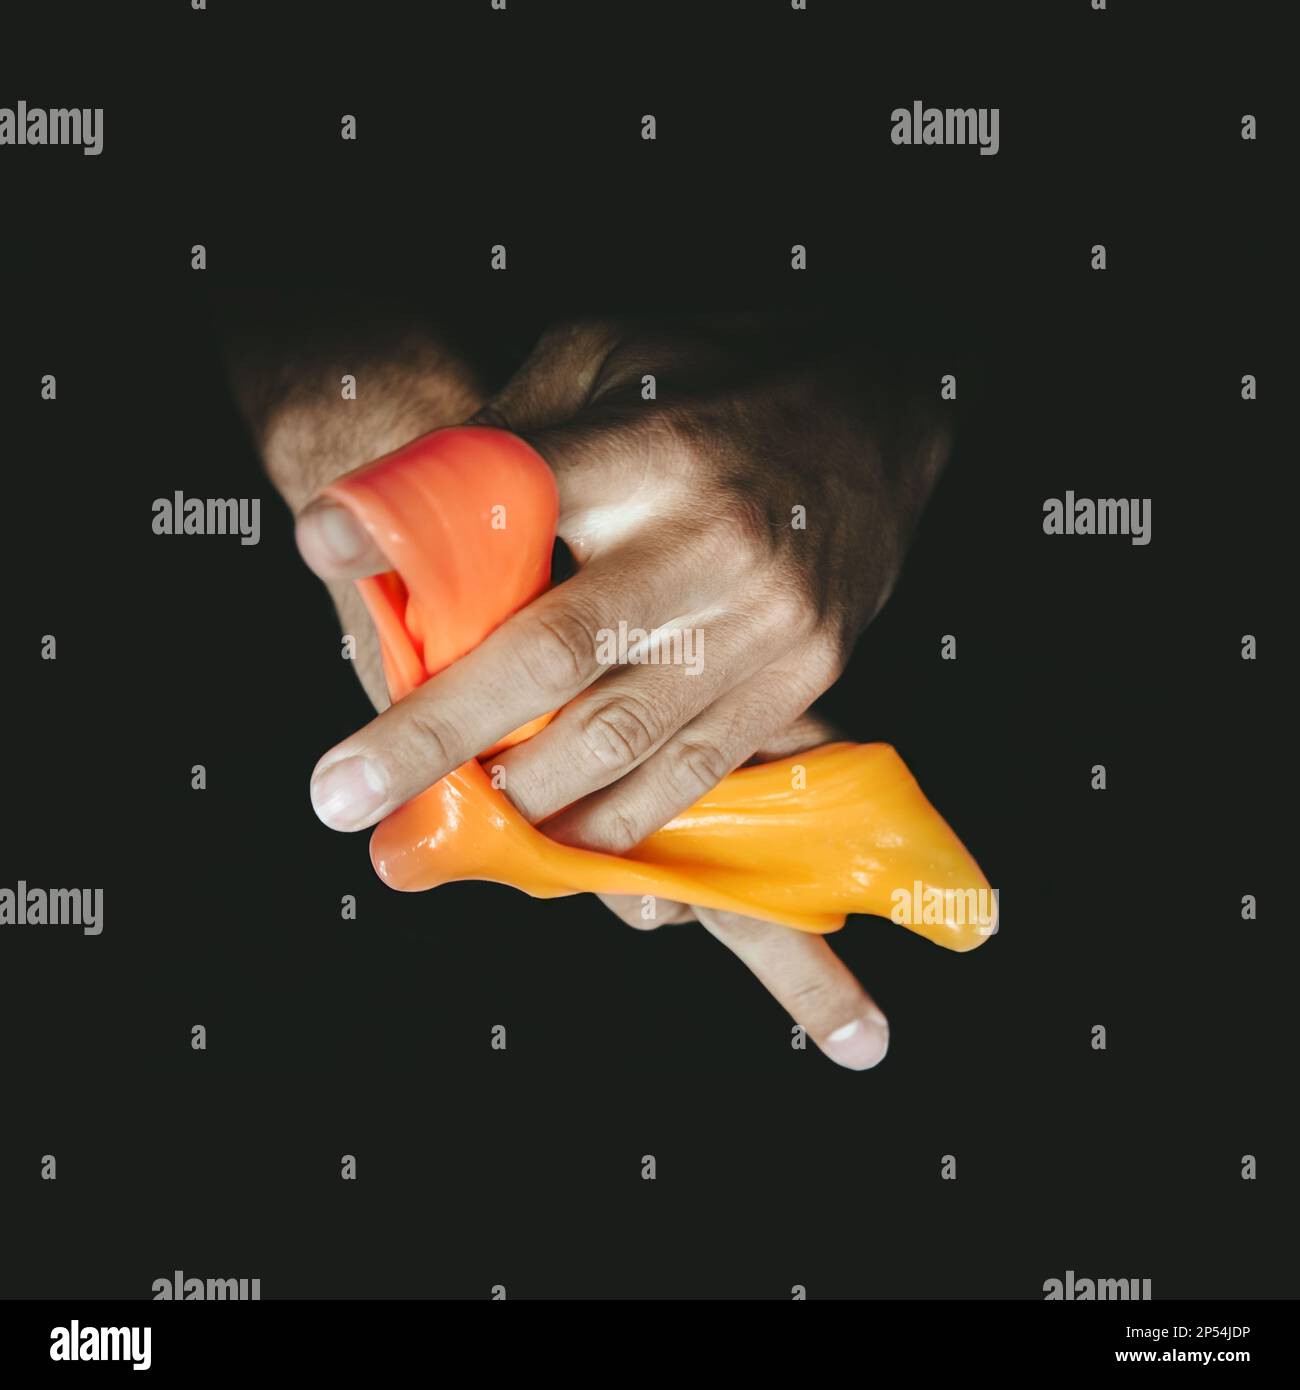 A picture of hands coming out of the dark with a glitchy orange colored slime wrapped around the fingers. Stock Photo